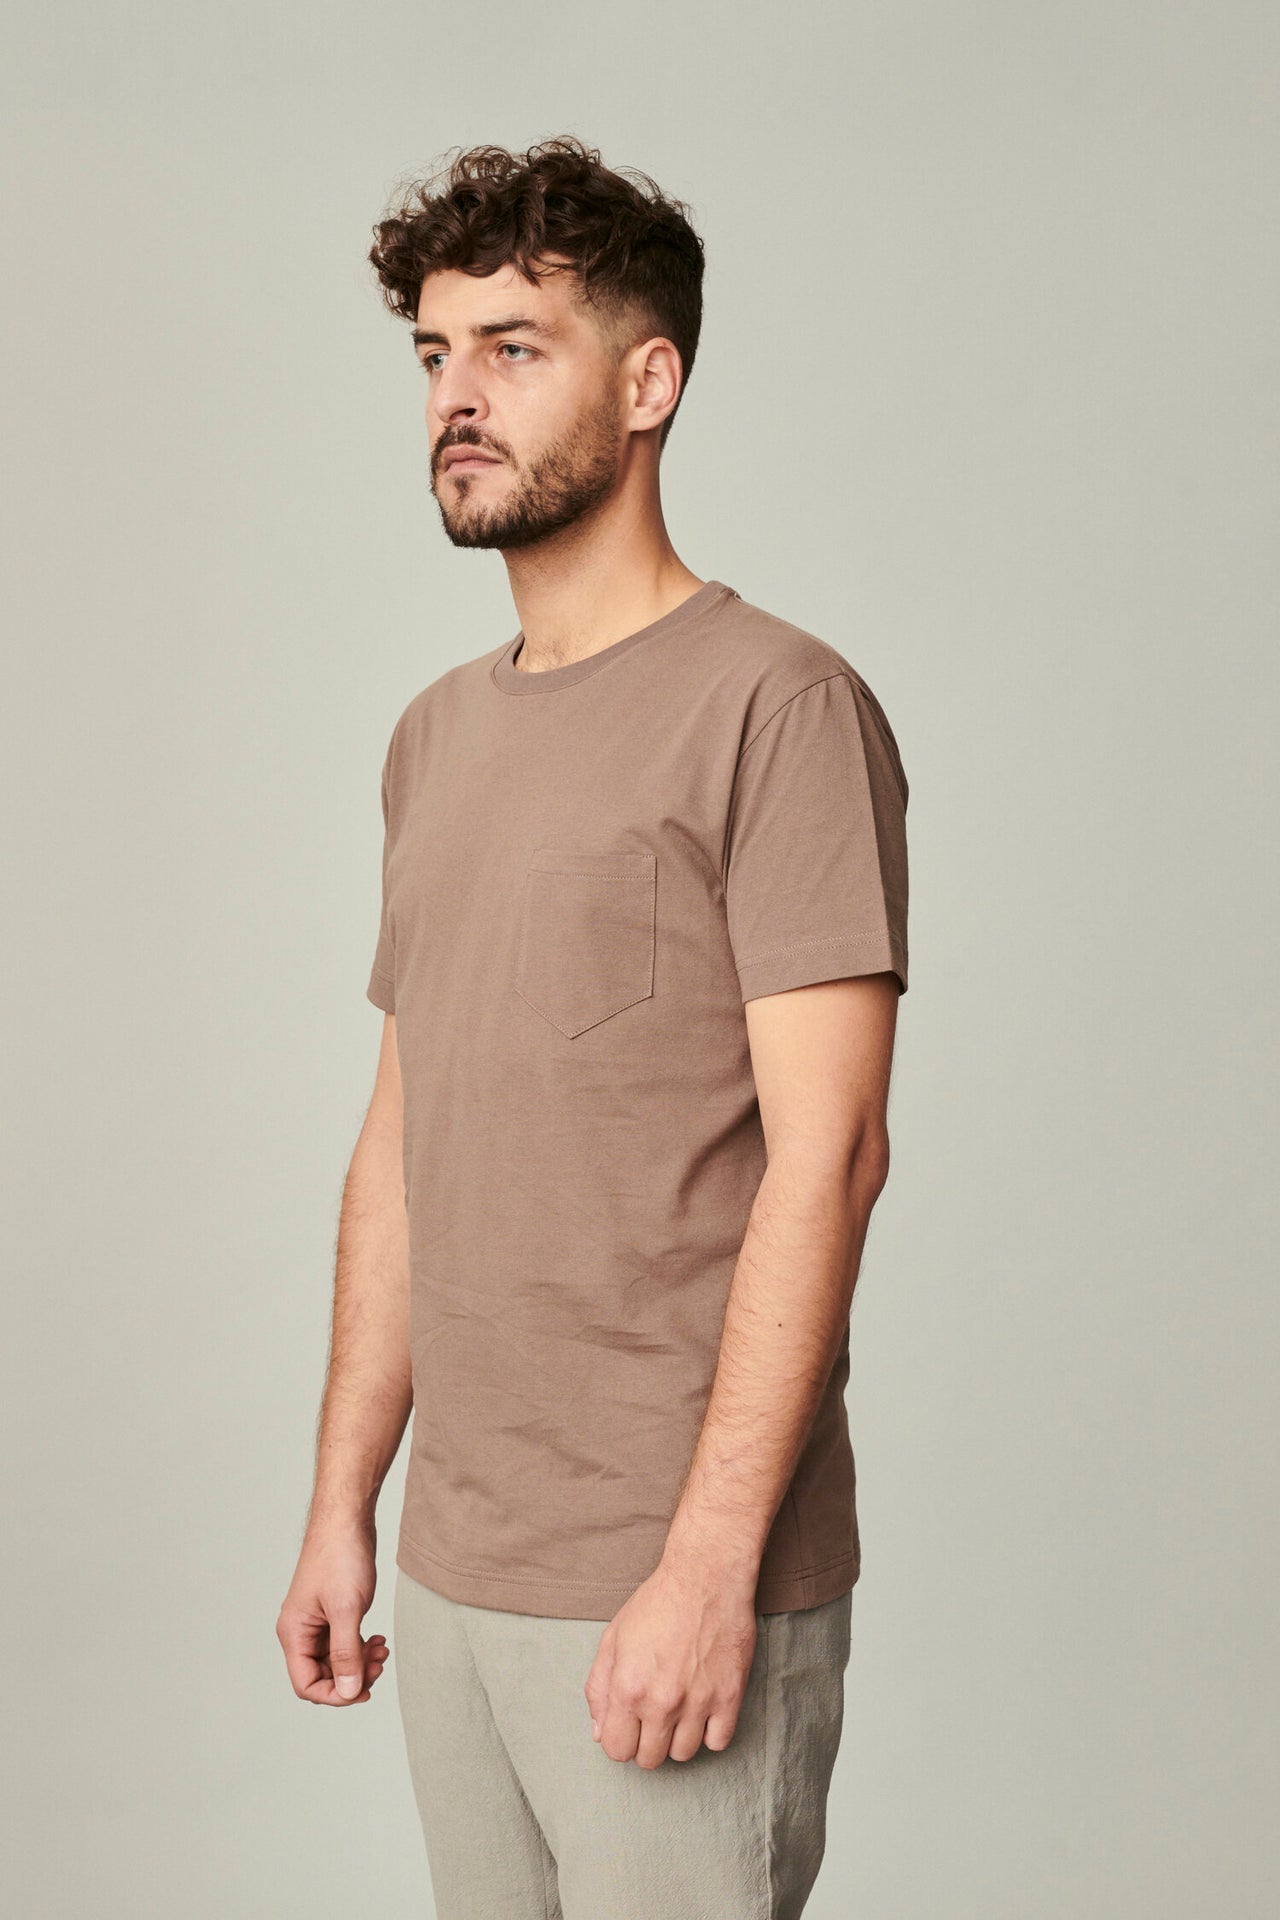 Pocket T-Shirt in a Taupe Japanese Organic Cotton Jersey